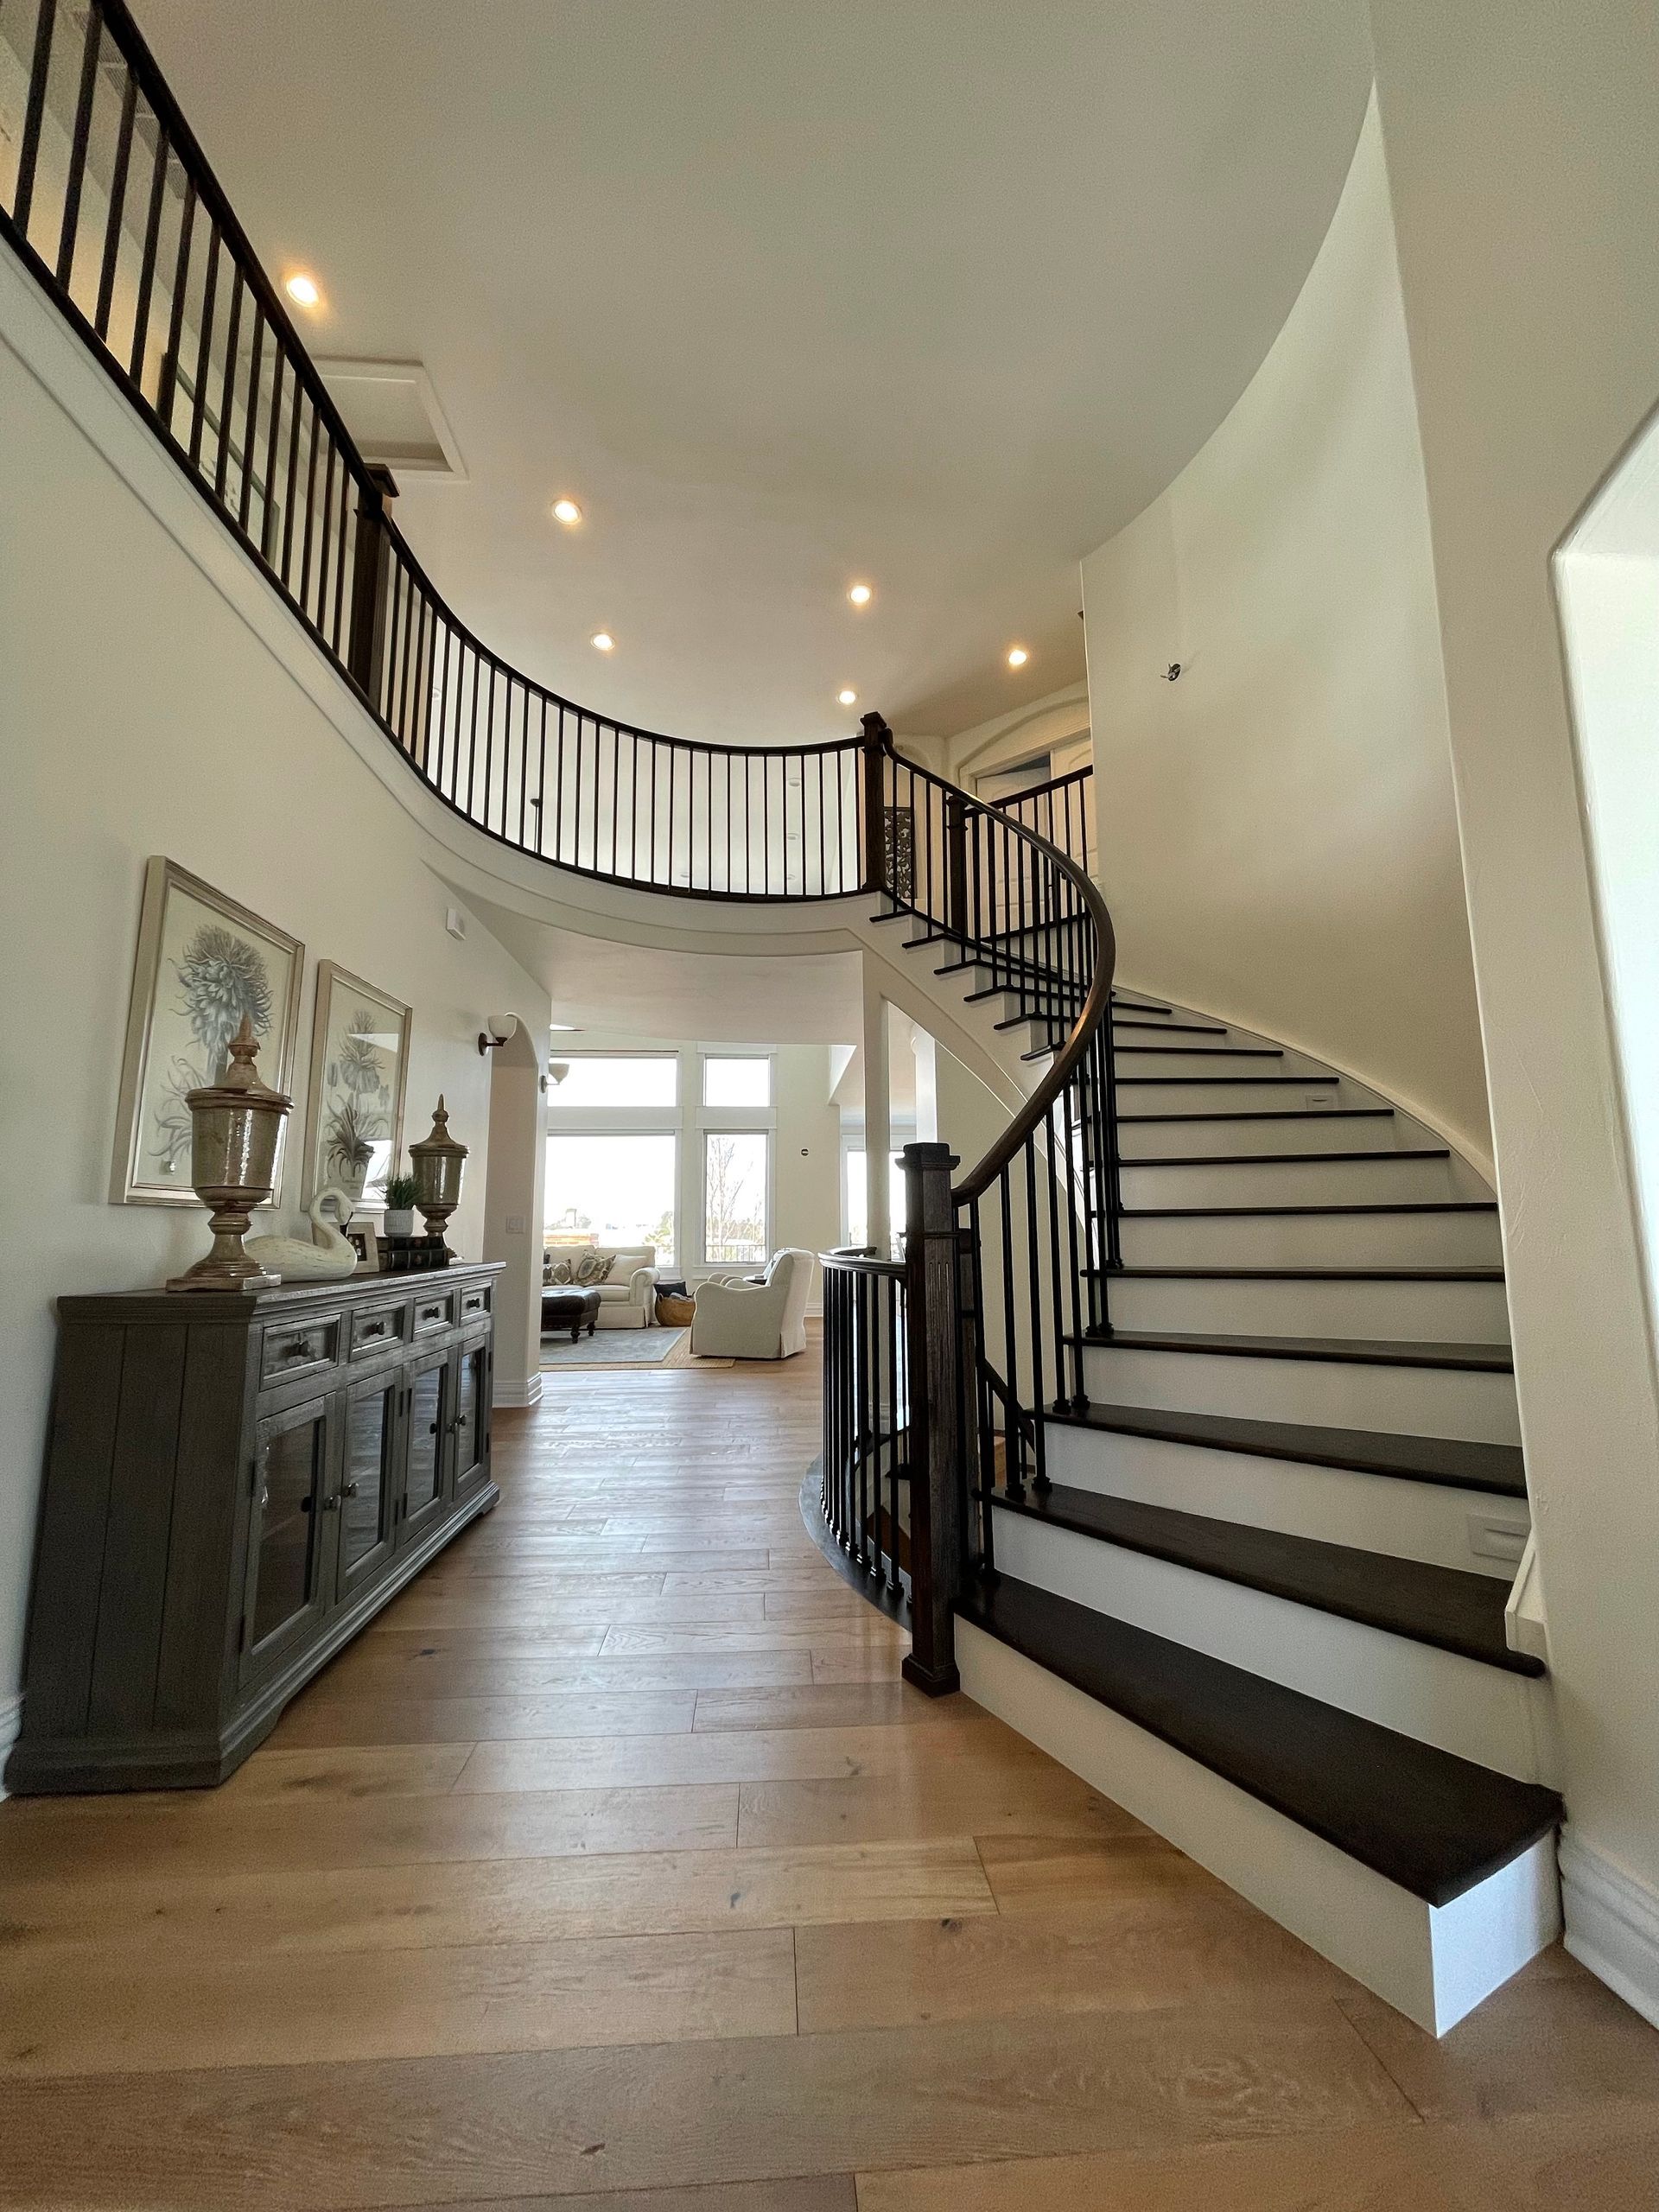 grand staircase in large home